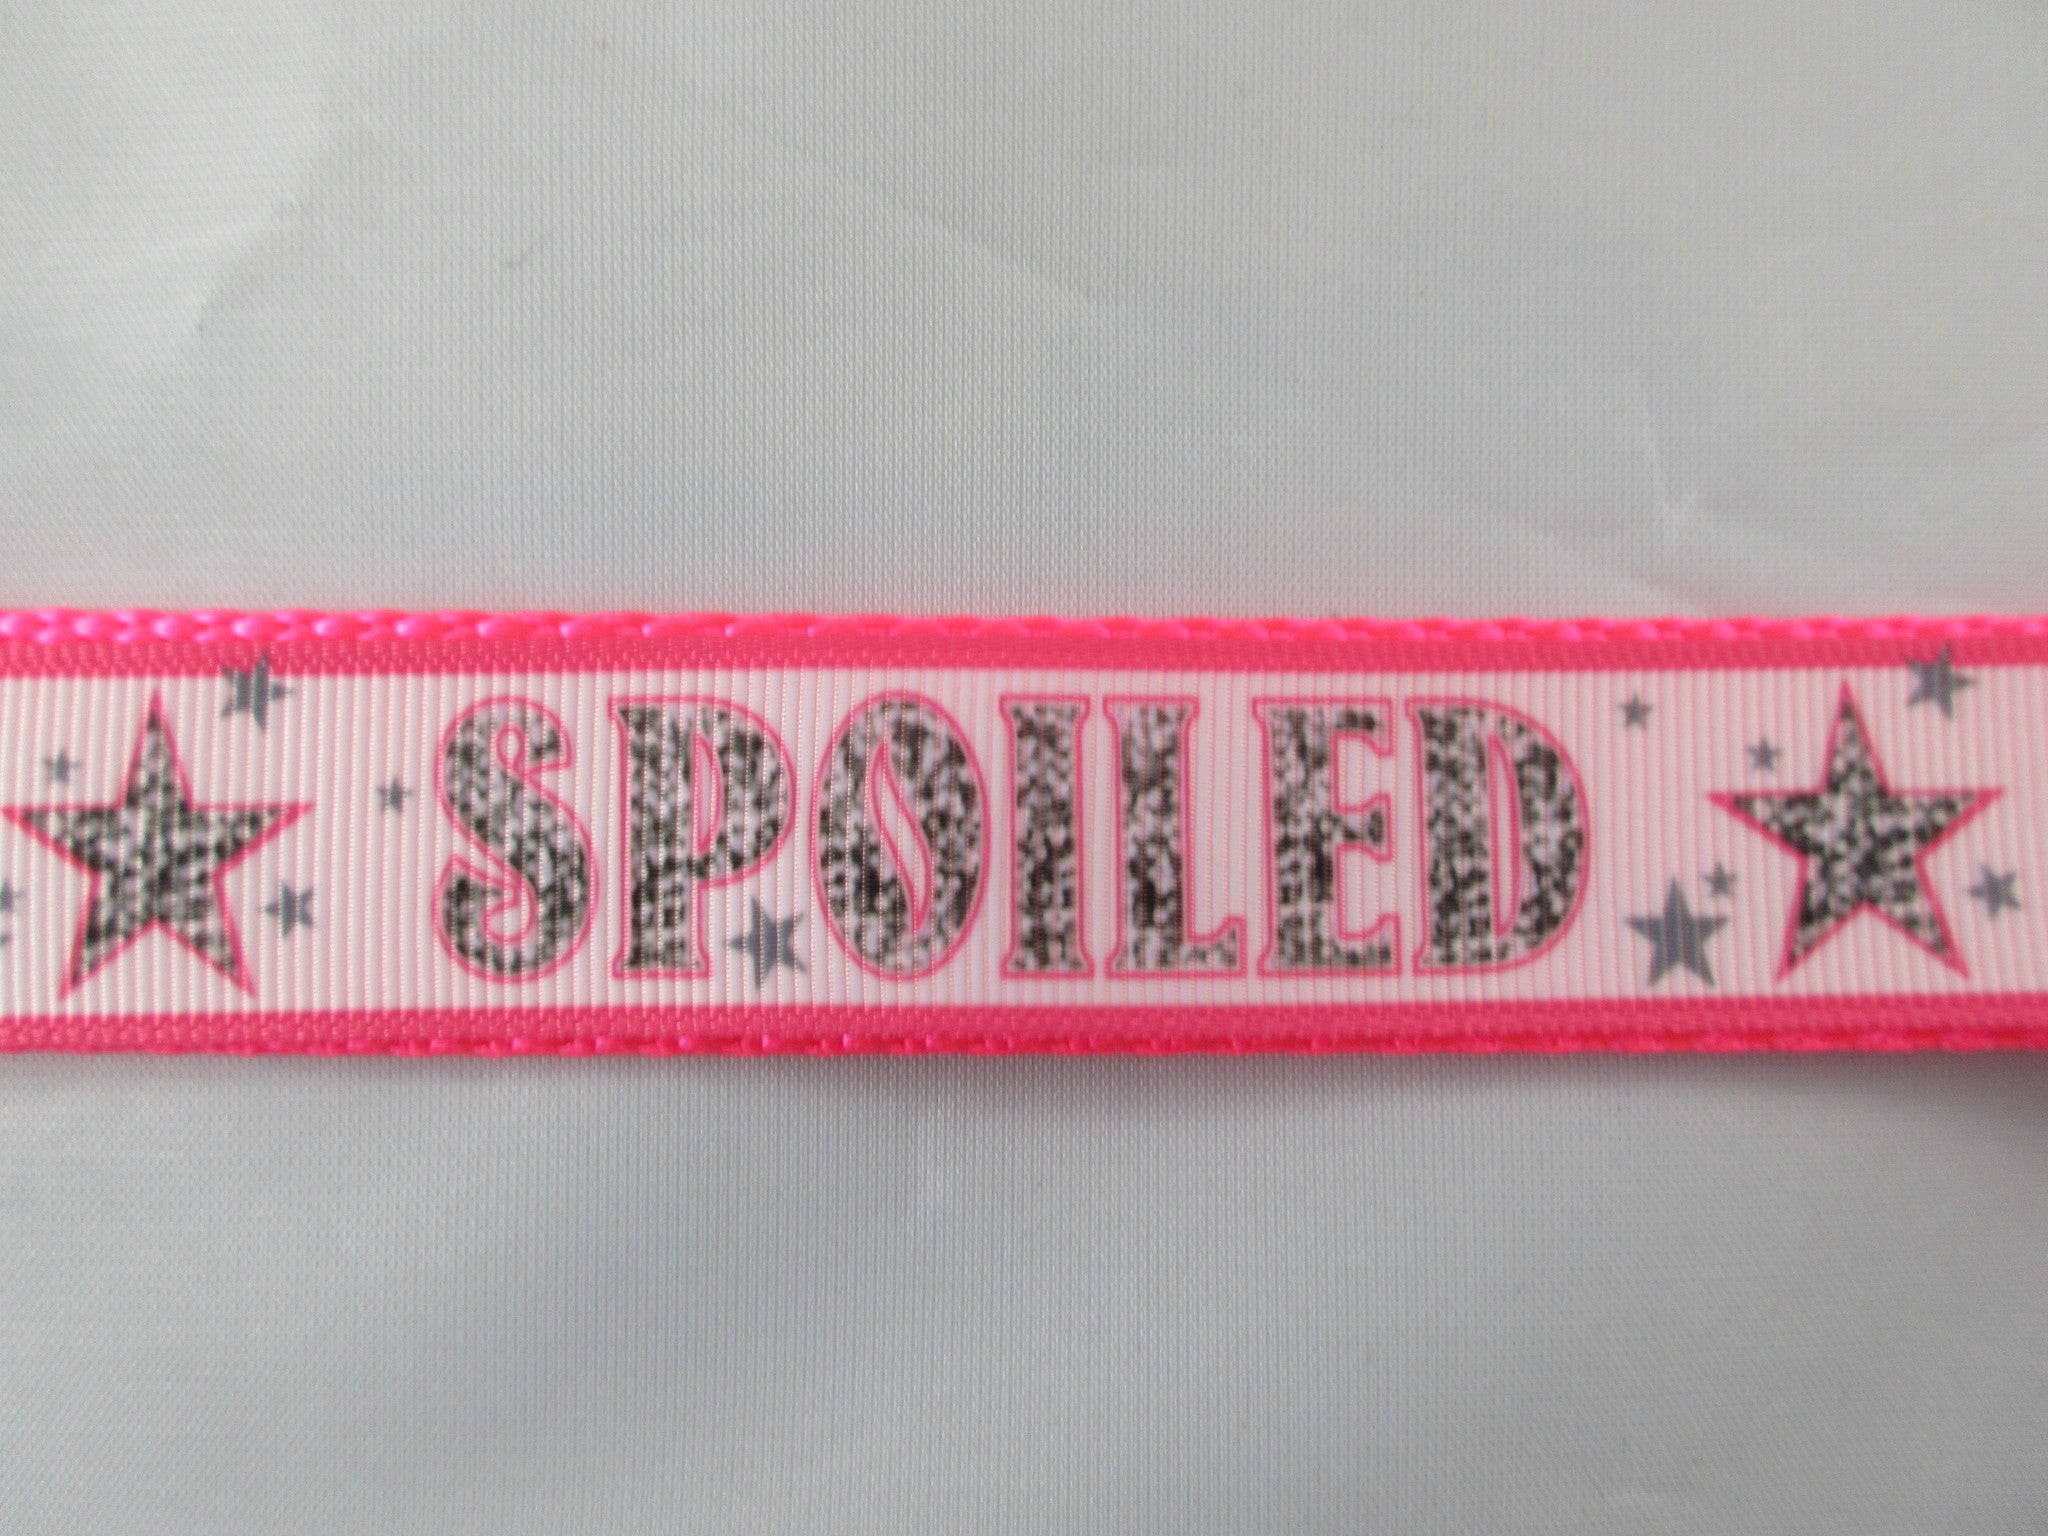 3/4" Pink Spoiled Dog Collar - Penny and Hoover's Pig Pen